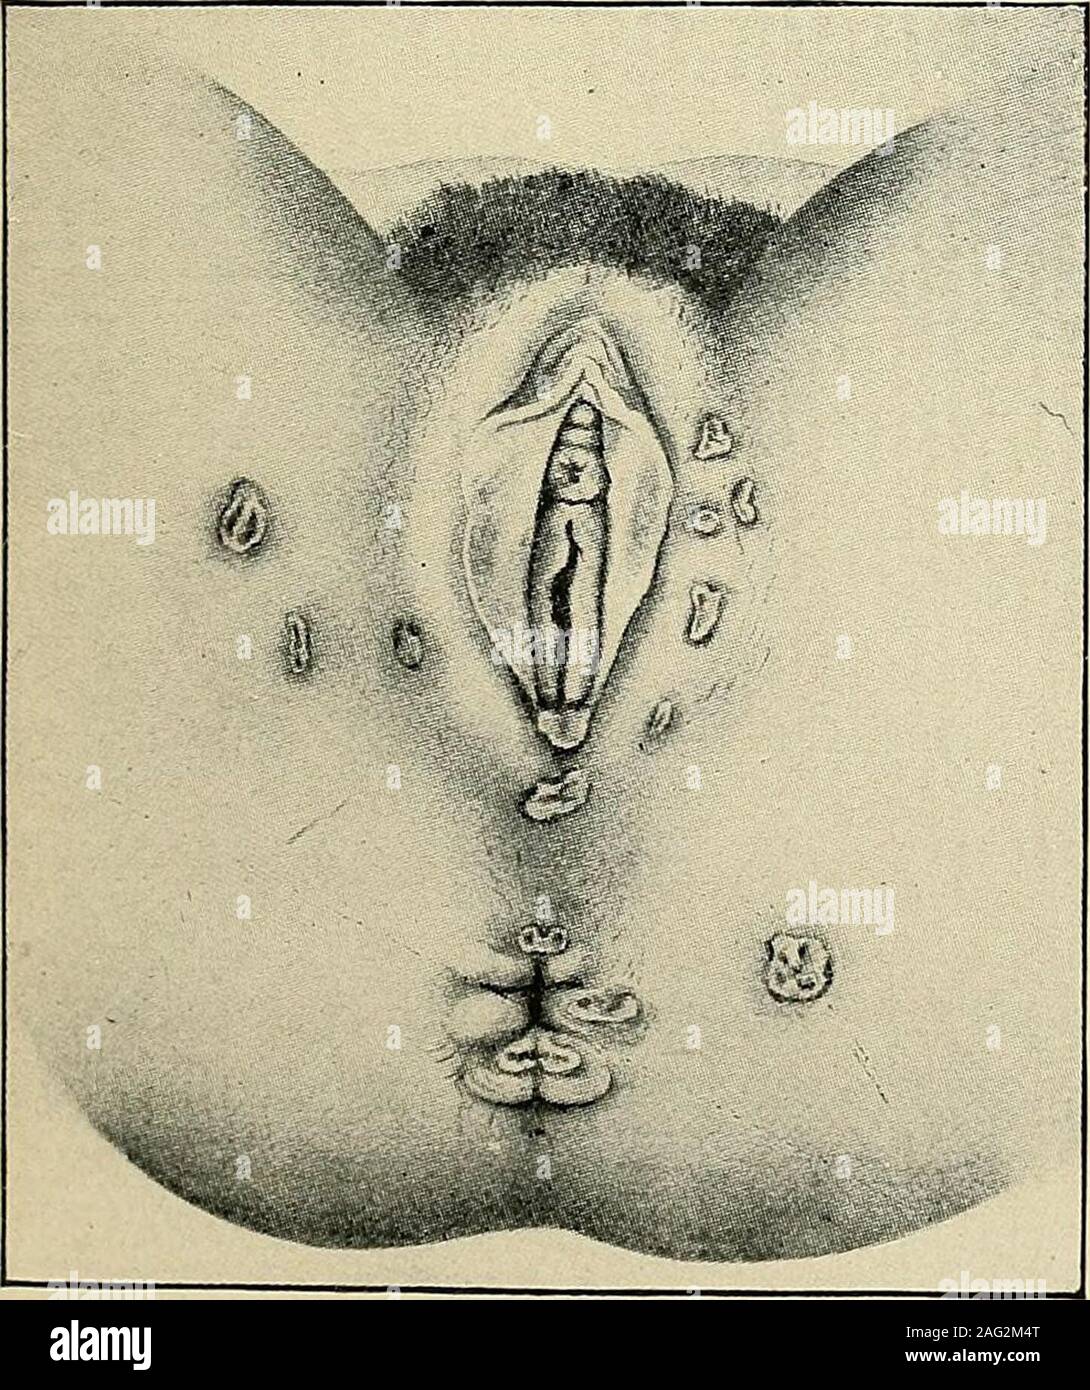 . The diagnosis and treatment of diseases of women. Fig. 217. Kraurosis Vulvae. CHivst- Diseases of Women.) not, the affection is, for the time being, given the above name. Kraurosis Vulvae (Fig. 217) is a peculiar neuro-atrophic condition of the externalgenitals, usually preceded by a long period of pruritis. The skin becomes atrophicand has a bleached and drawn and withered appearance. It is seen most frequentlyin elderly women, and is usually accompanied by intense pruritis, as attested by the history of the case and by the abra-sions from scratching. ULCER ON EXTERNAL GENI-TALS. Simple Ulc Stock Photo